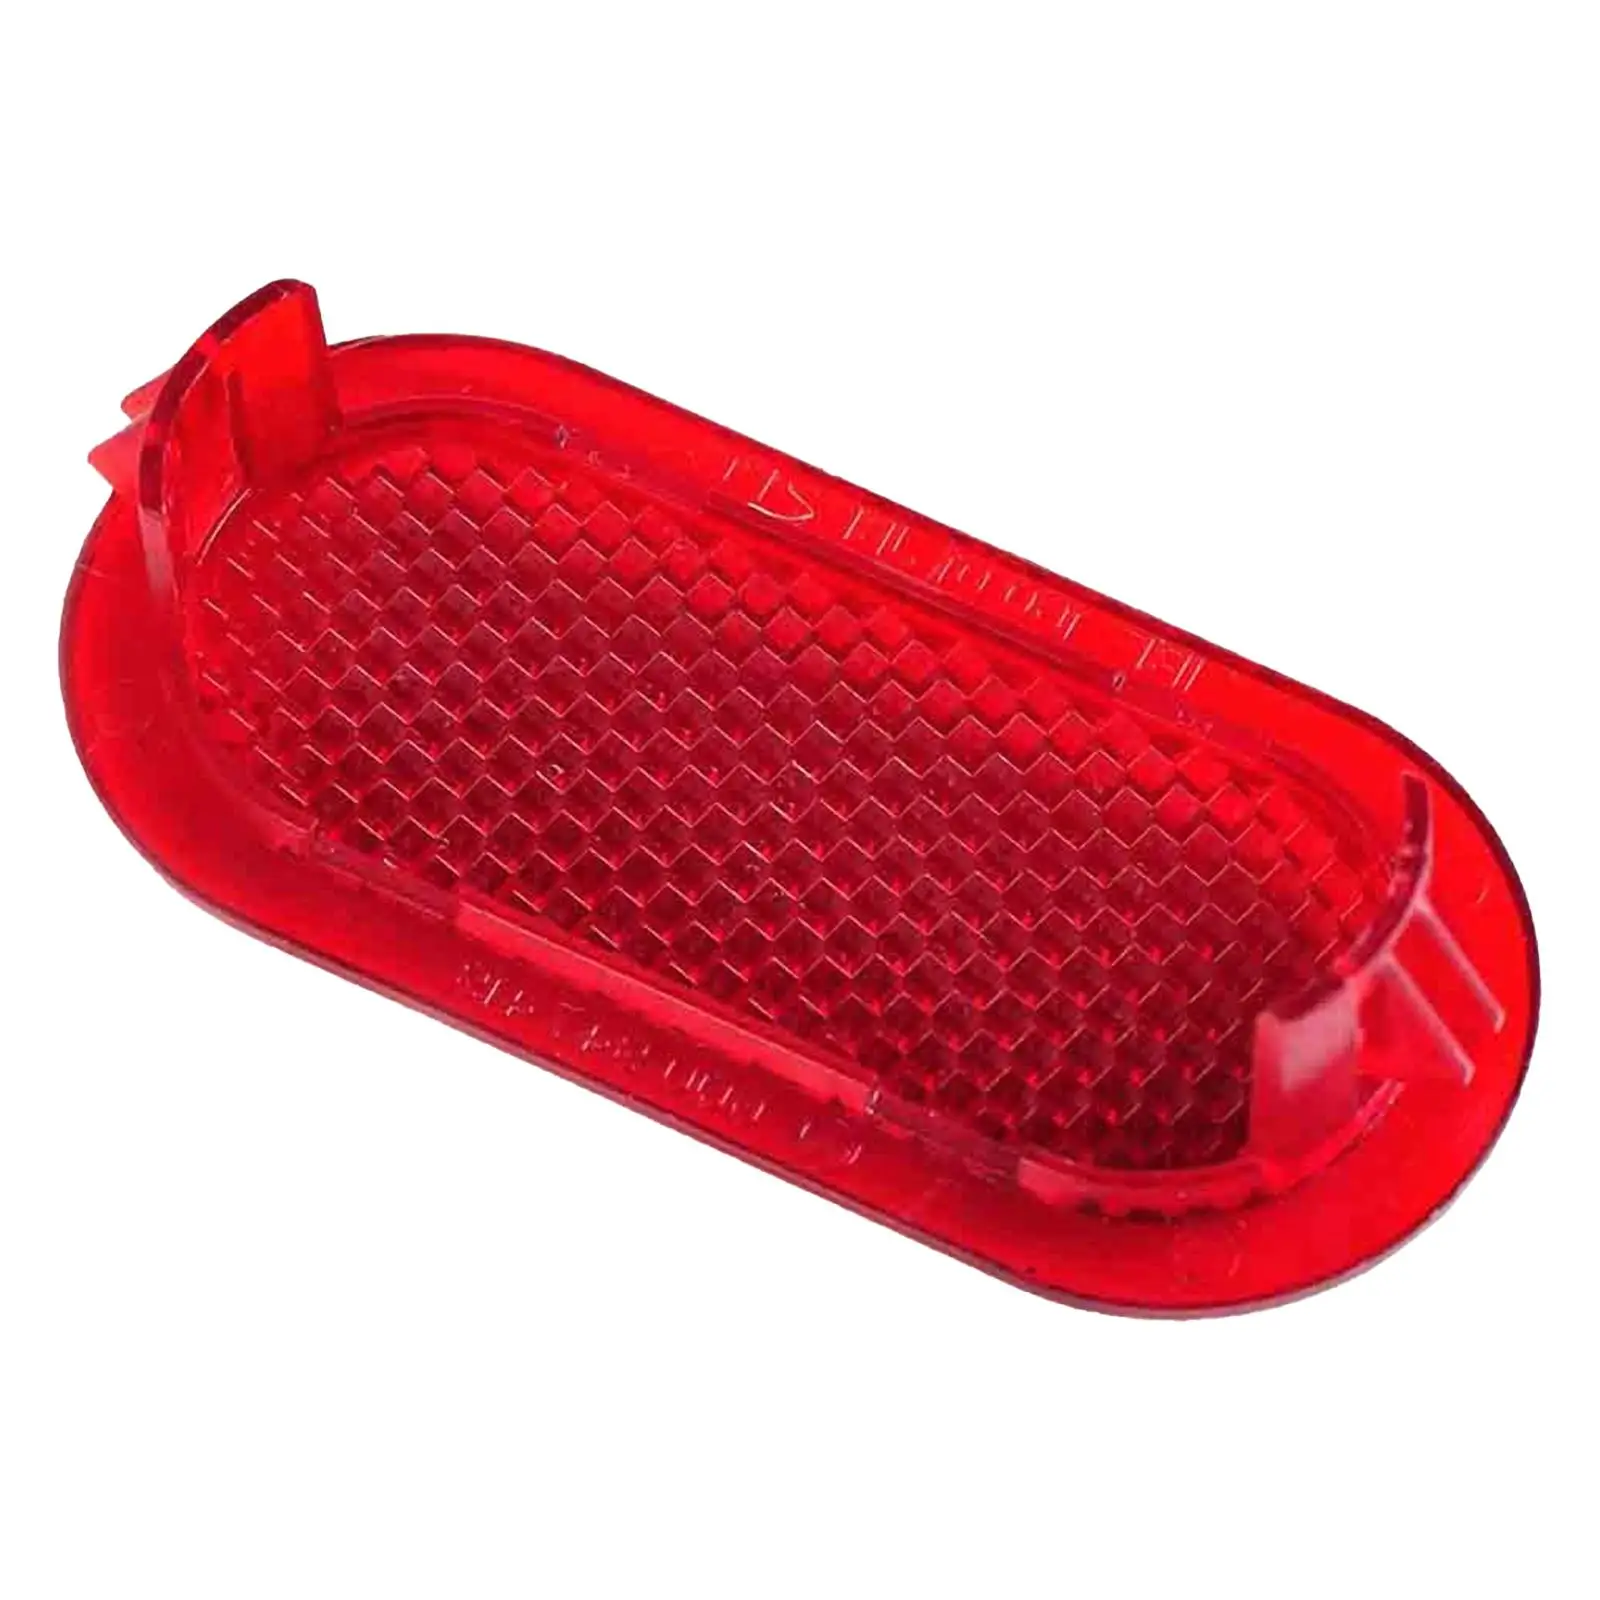 Car Door Panel Warning Light Reflector Red 6Q0947419 for VW Touran Touran Easy Installation Automotive Accessories